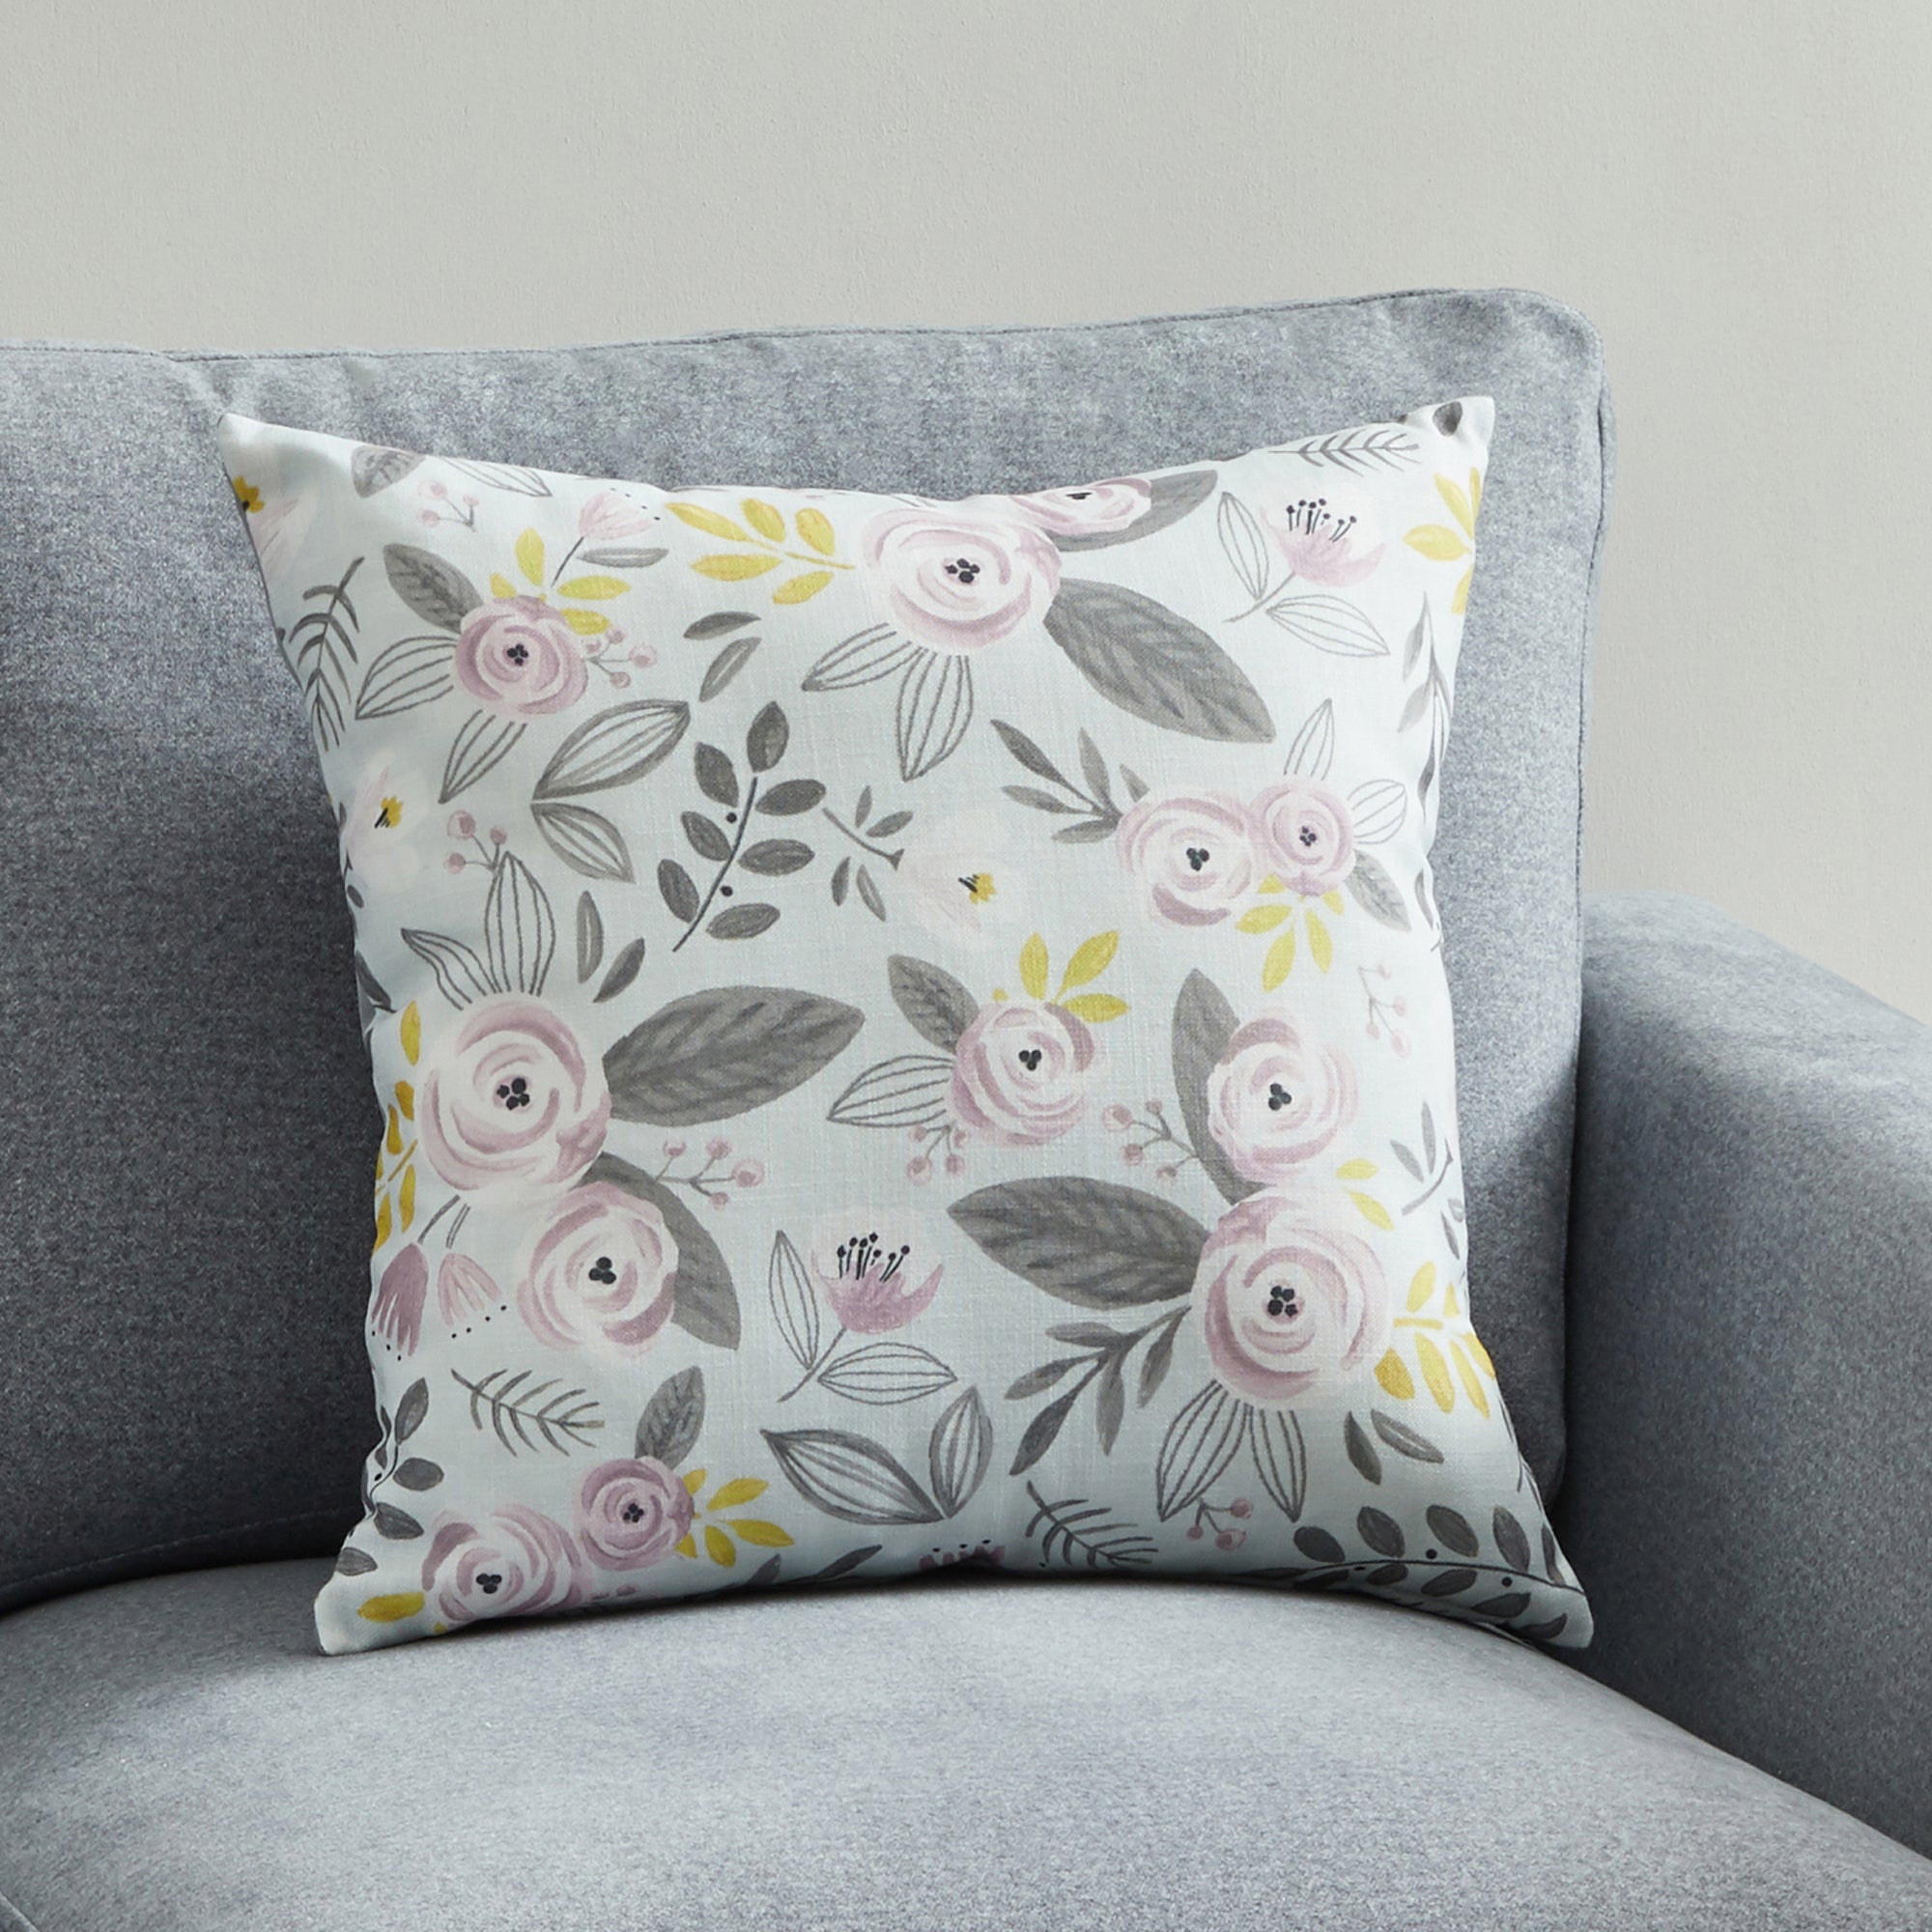 Blooms Blush and Ochre Floral Cushion